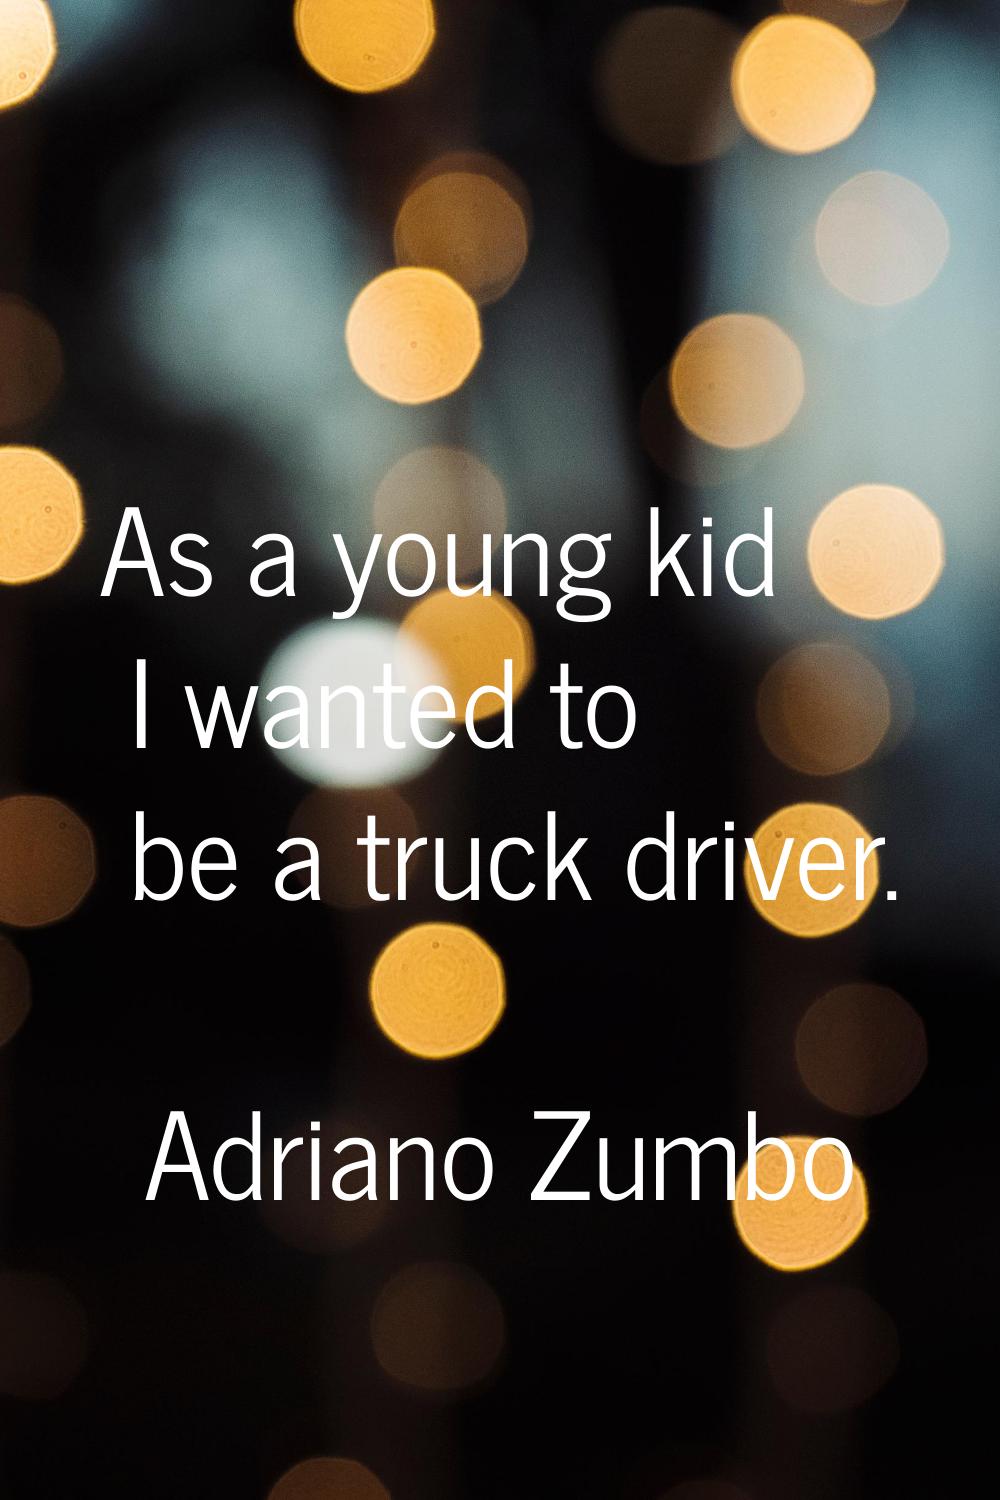 As a young kid I wanted to be a truck driver.